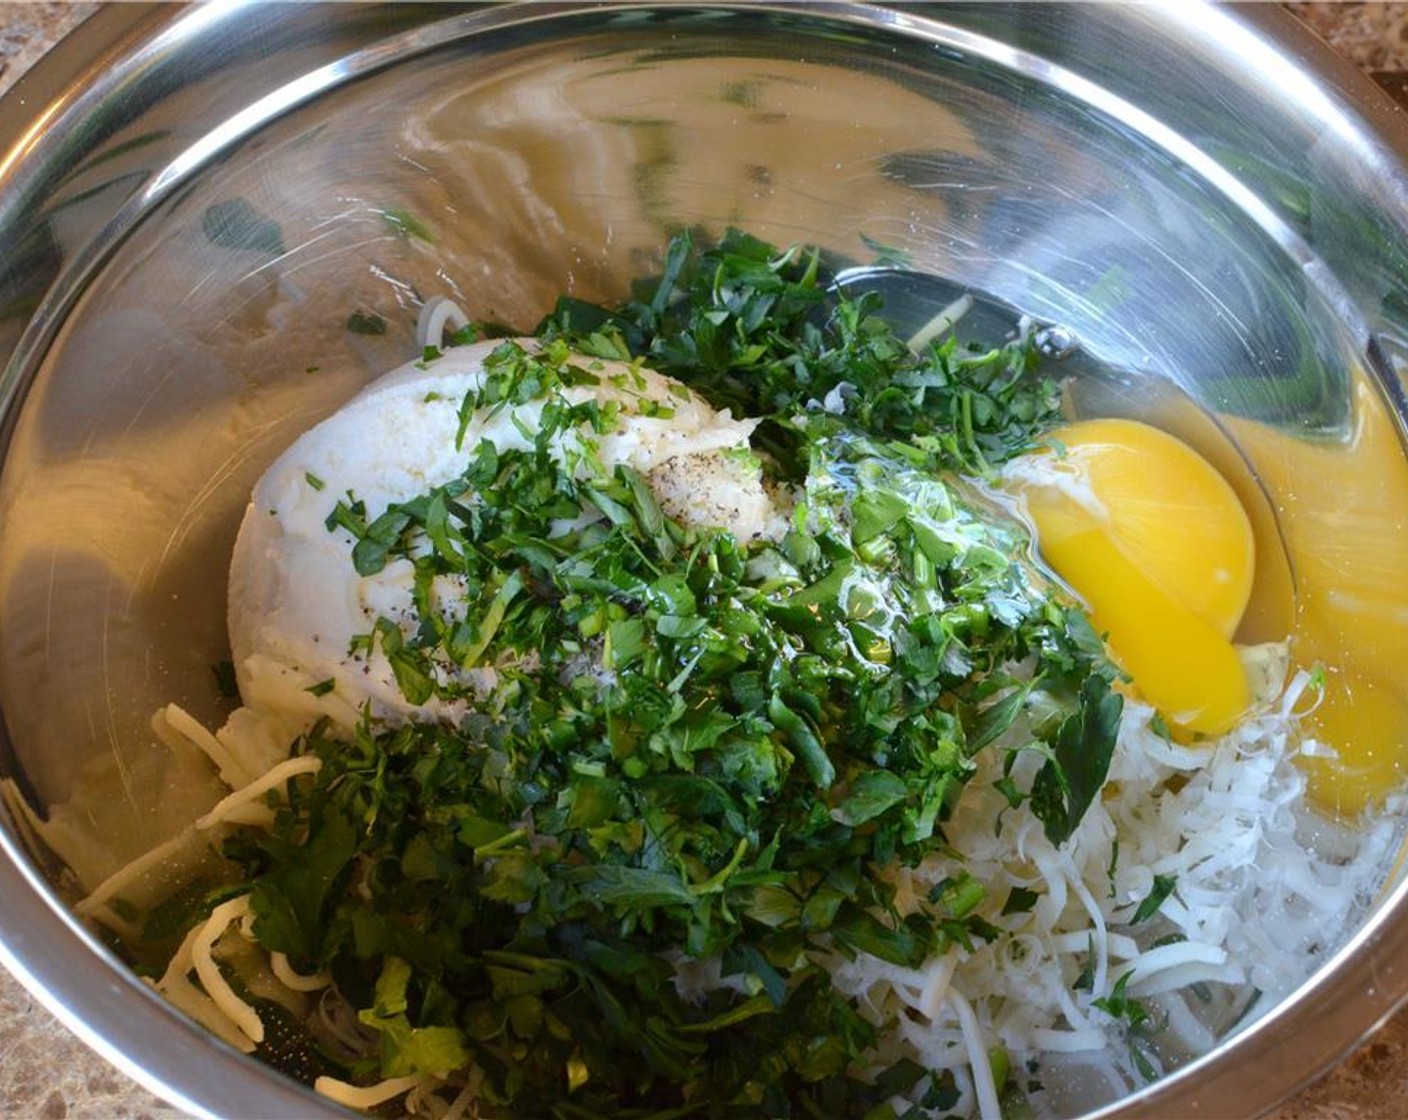 step 8 In a mixing bowl, add the Ricotta Cheese (1 3/4 cups), Mozzarella Cheese (1/2 cup), Parmesan Cheese (1/2 cup), one part of the fresh Italian Flat-Leaf Parsley (1 handful), Farmhouse Eggs® Large Brown Egg (1), Salt (to taste) and Ground Black Pepper (to taste).